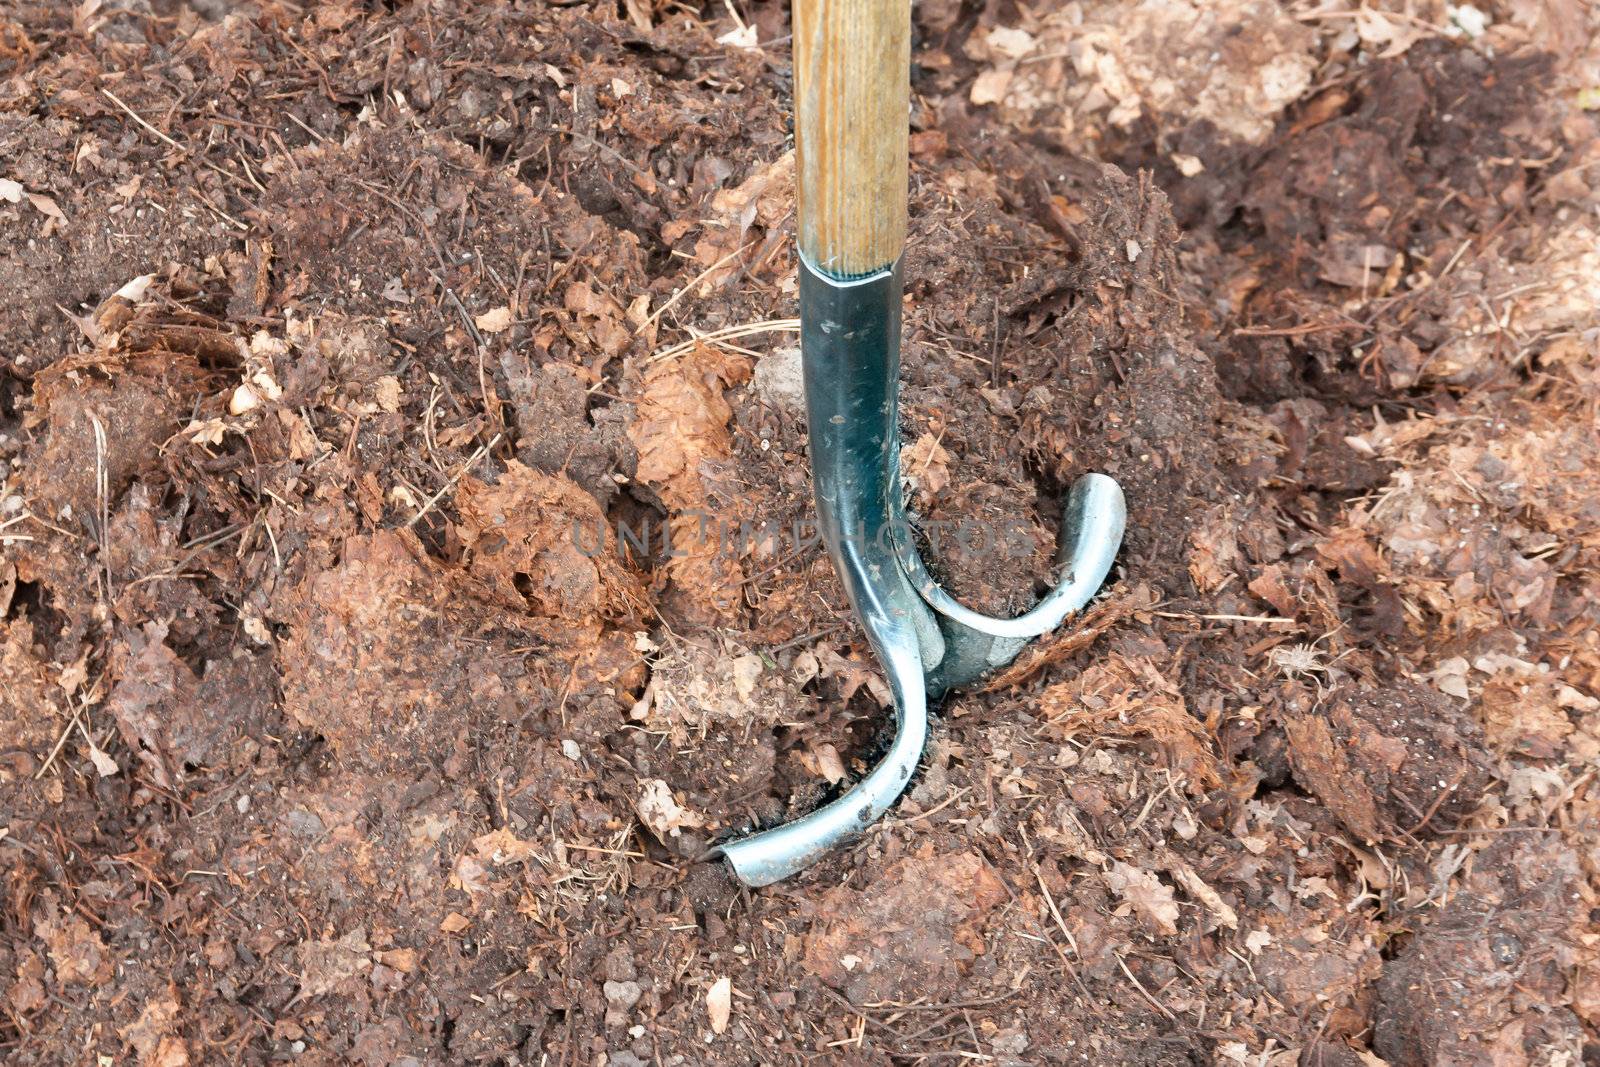 Shovel Placed in Compost Pile by wolterk